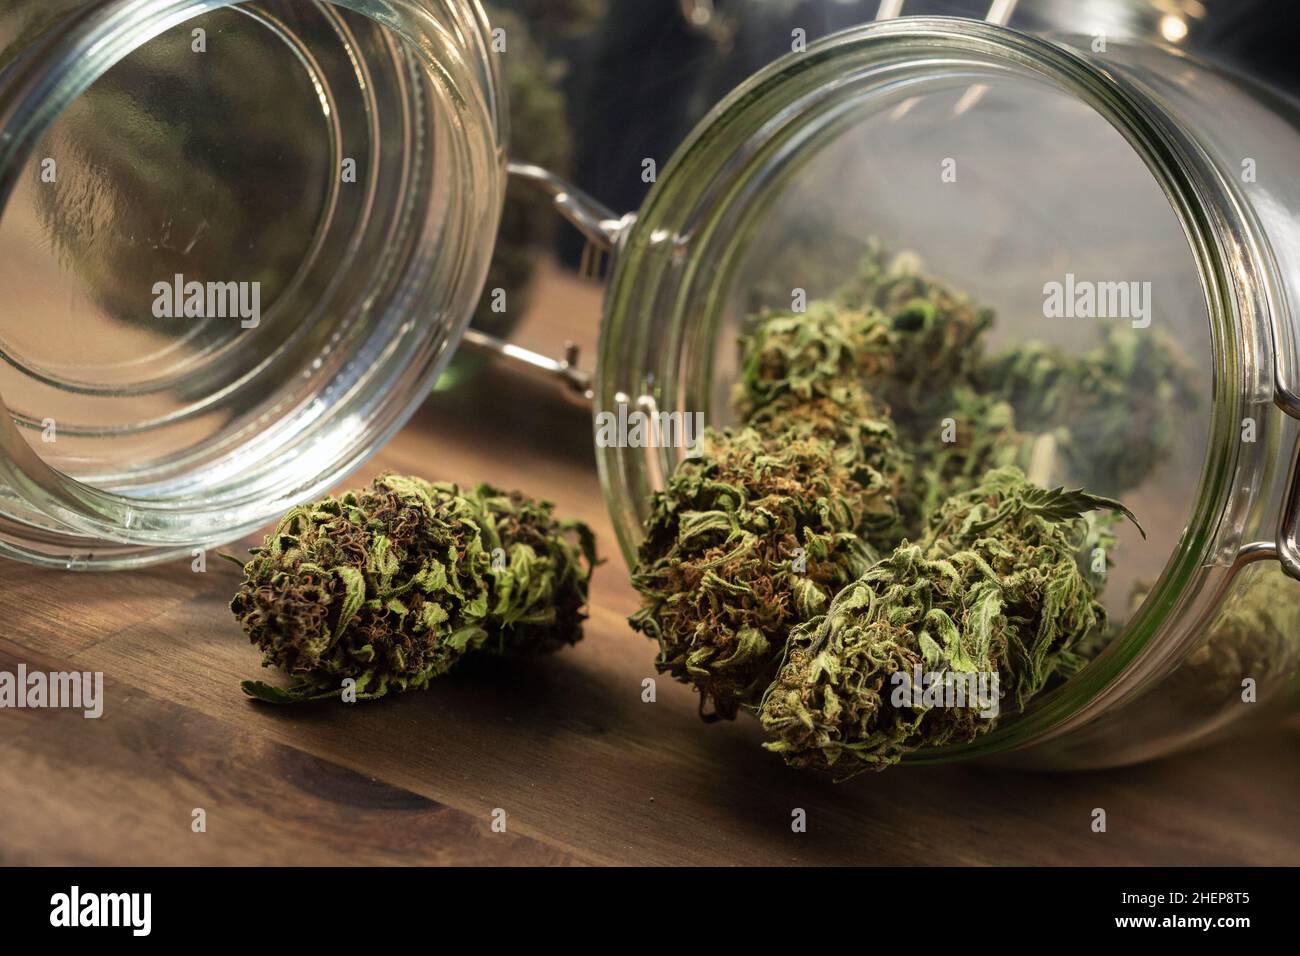 Dry CBD hemp buds, cannabis potheads spilled from a glass jar on the table. Stock Photo